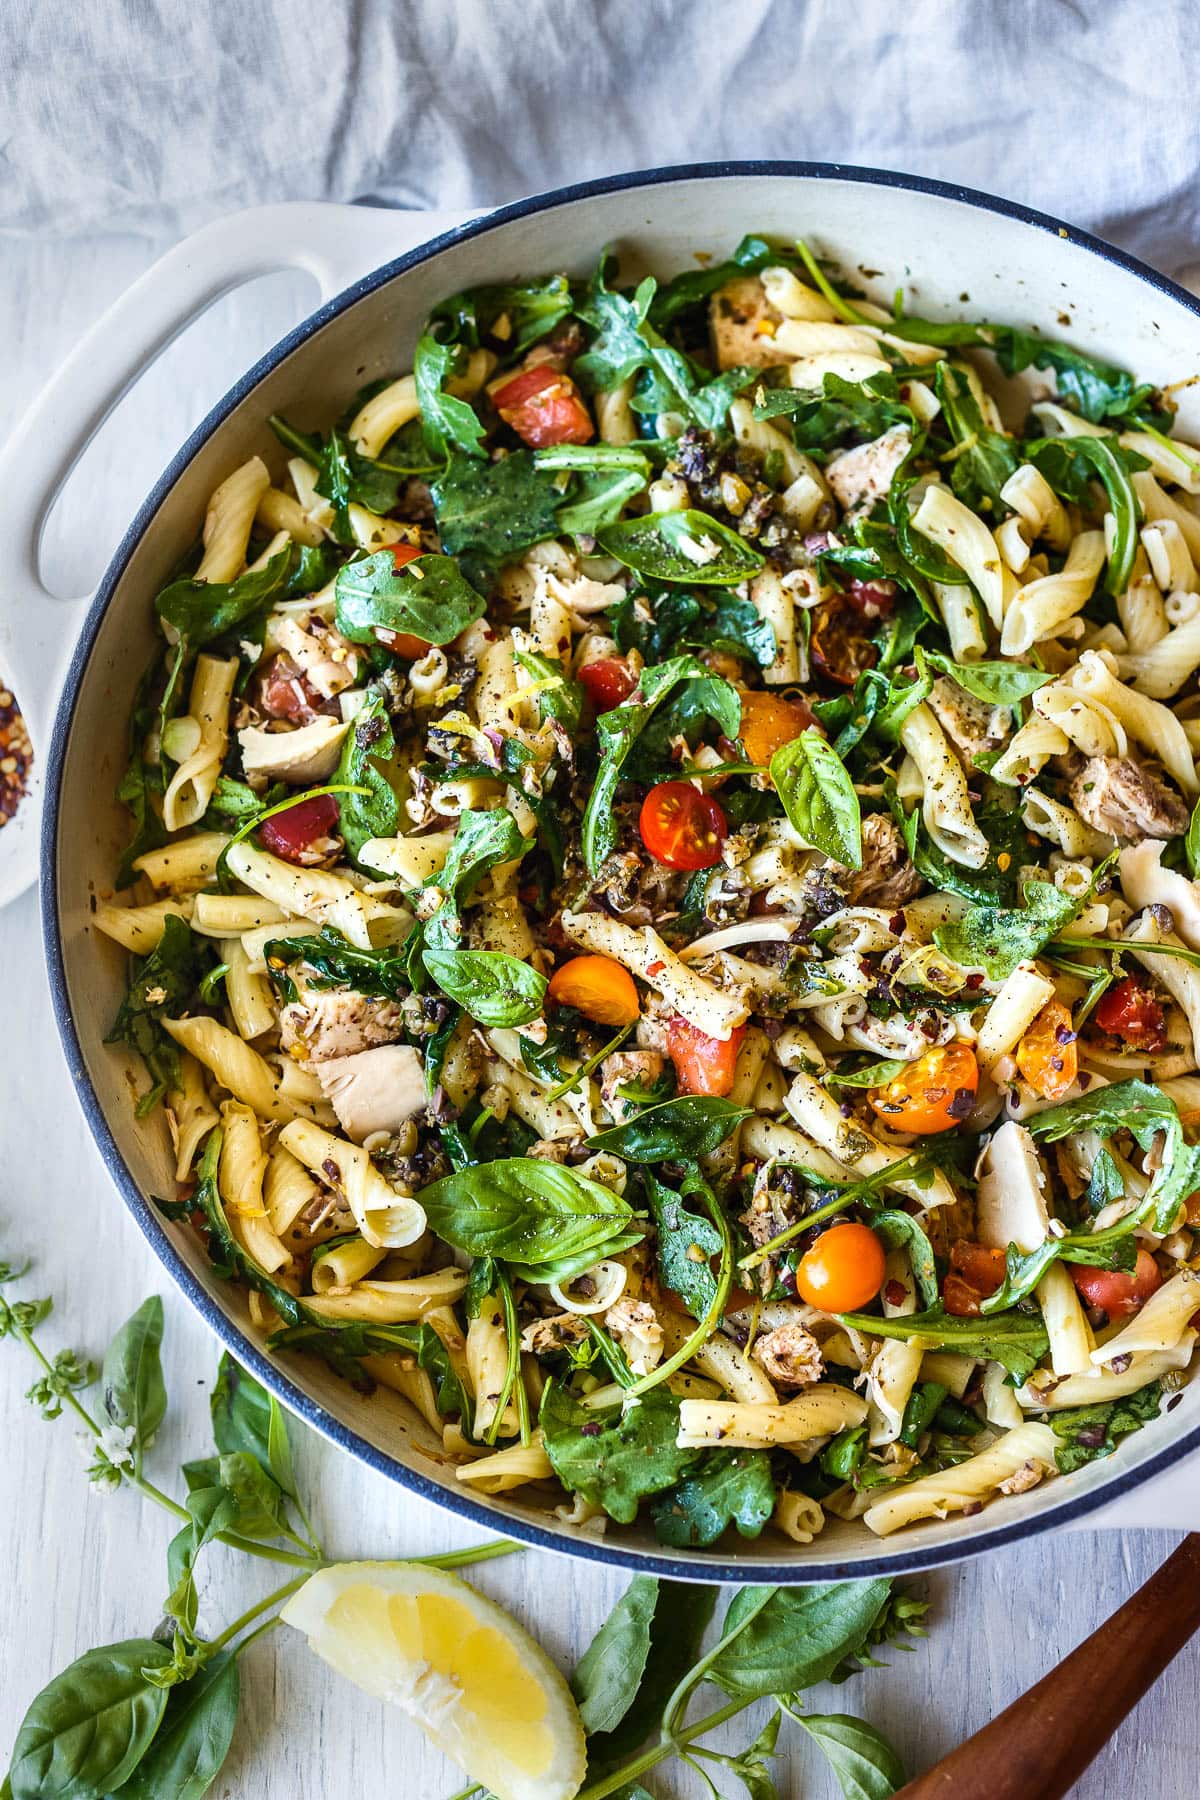 Tuna Pasta with Olive Tapenade & Fresh Tomatoes is a super fast, fresh pasta dish that is full of bright clean flavors.  An easy dinner ready in 30 minutes!  Healthy, quick and delicious!